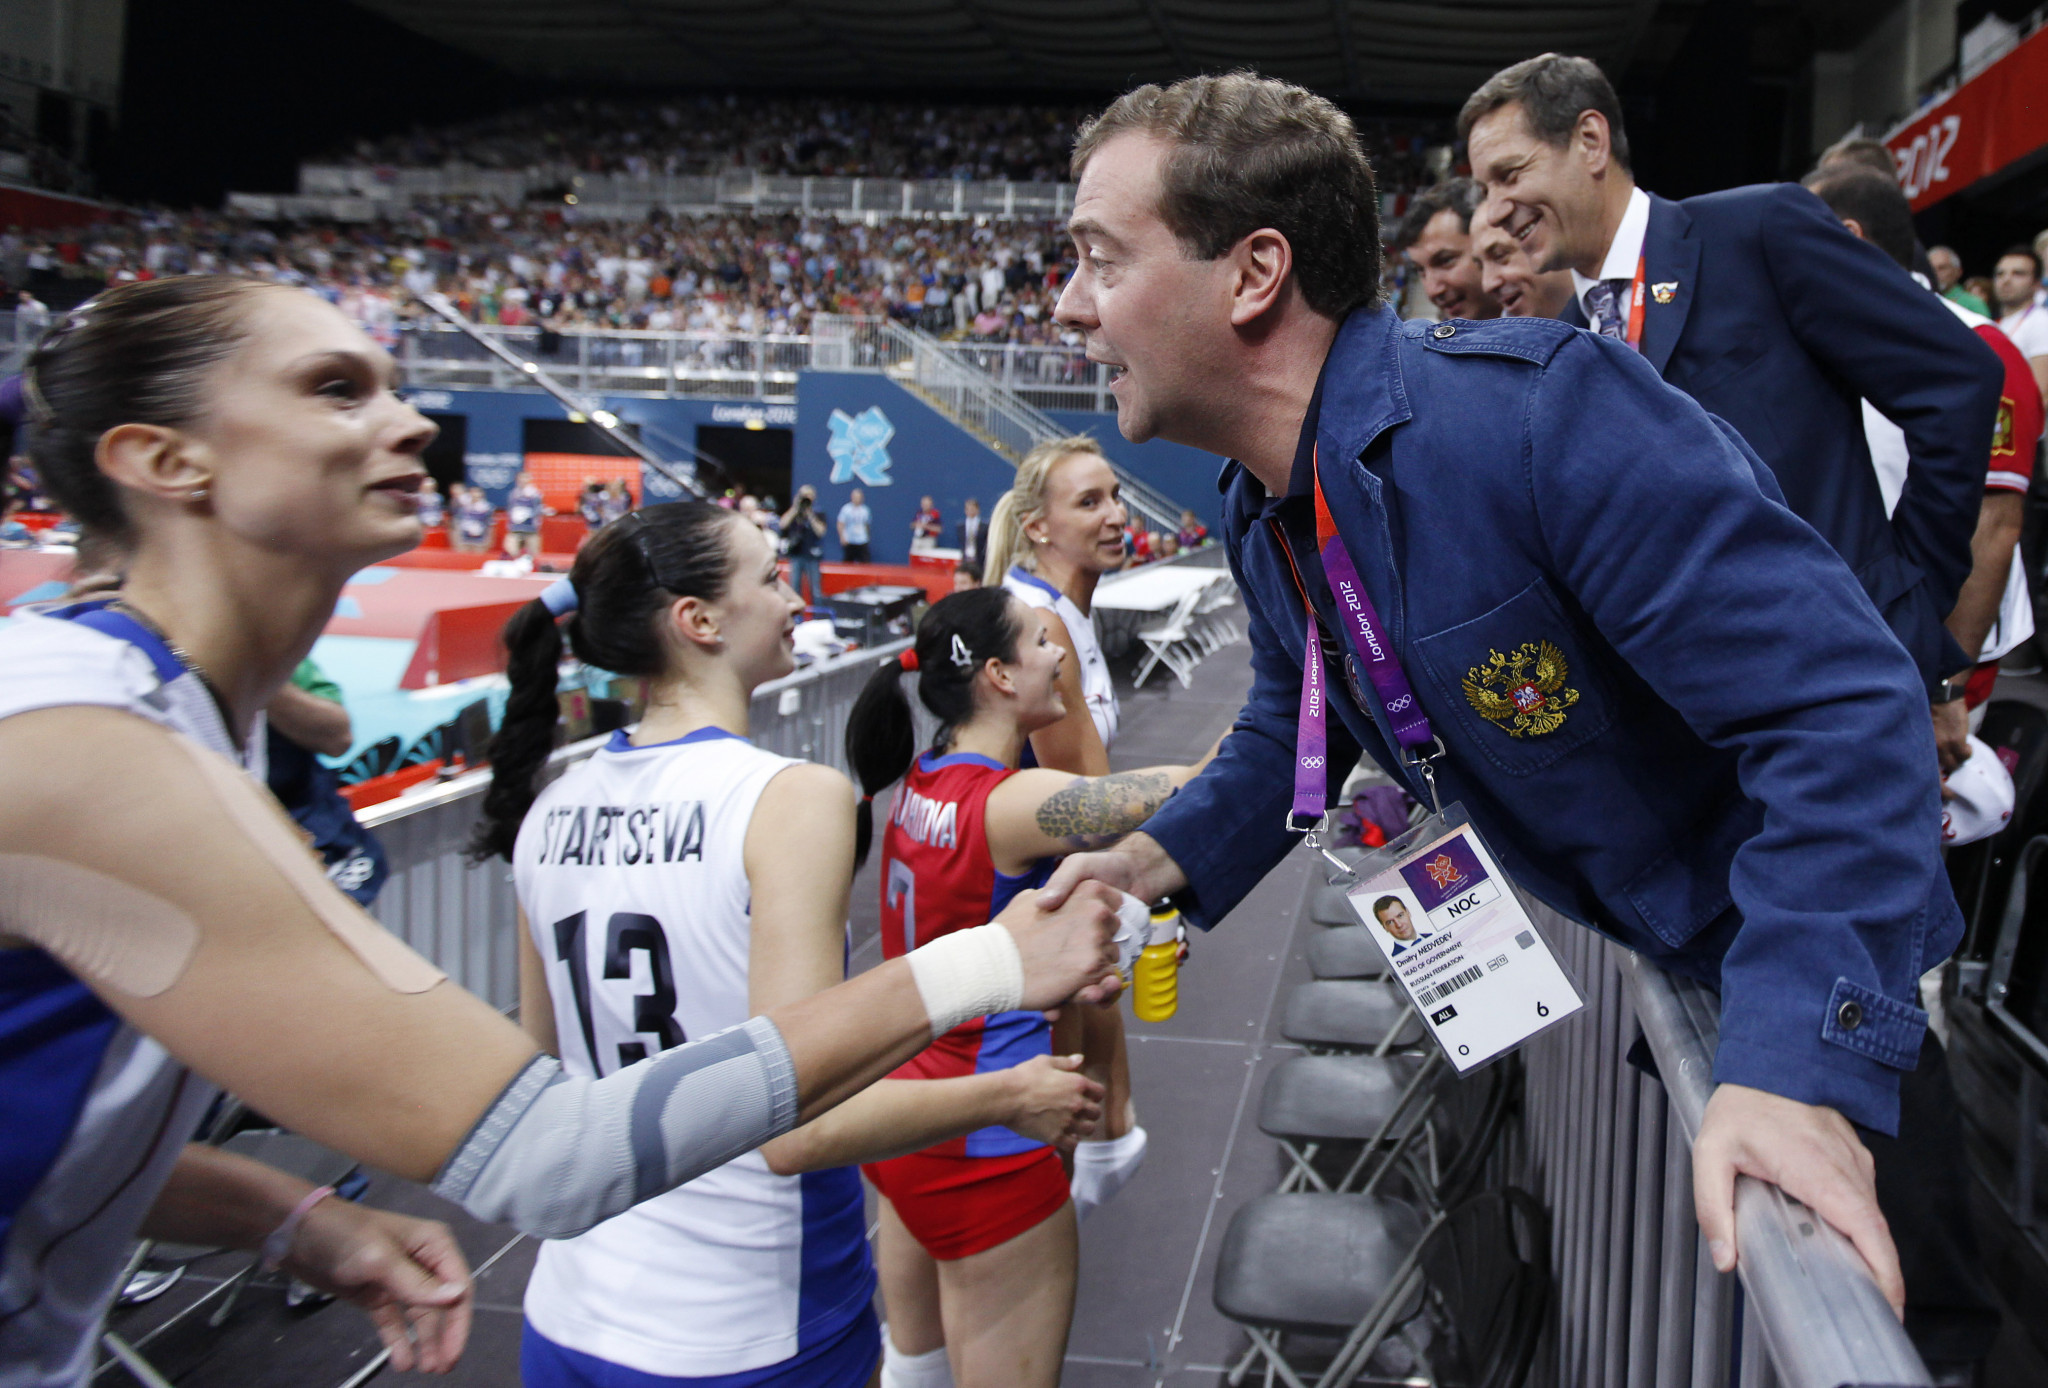 Dmitry Medvedev pictured attending the London 2012 Olympic Games, which took place when he was President of Russia ©Getty Images